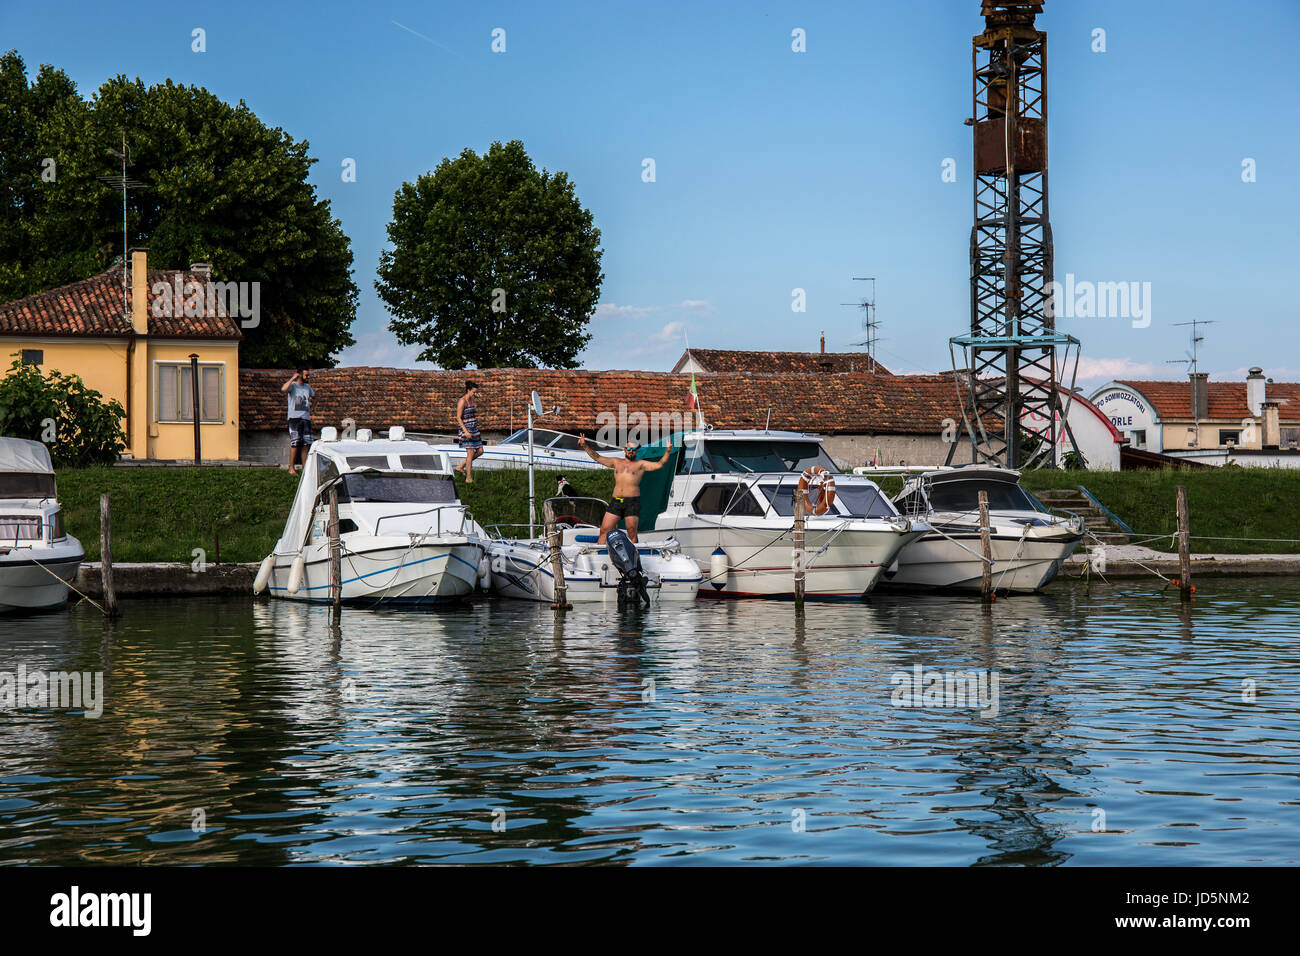 Boats moored at the dock with people preparing to sail in Caorle - Italy Stock Photo